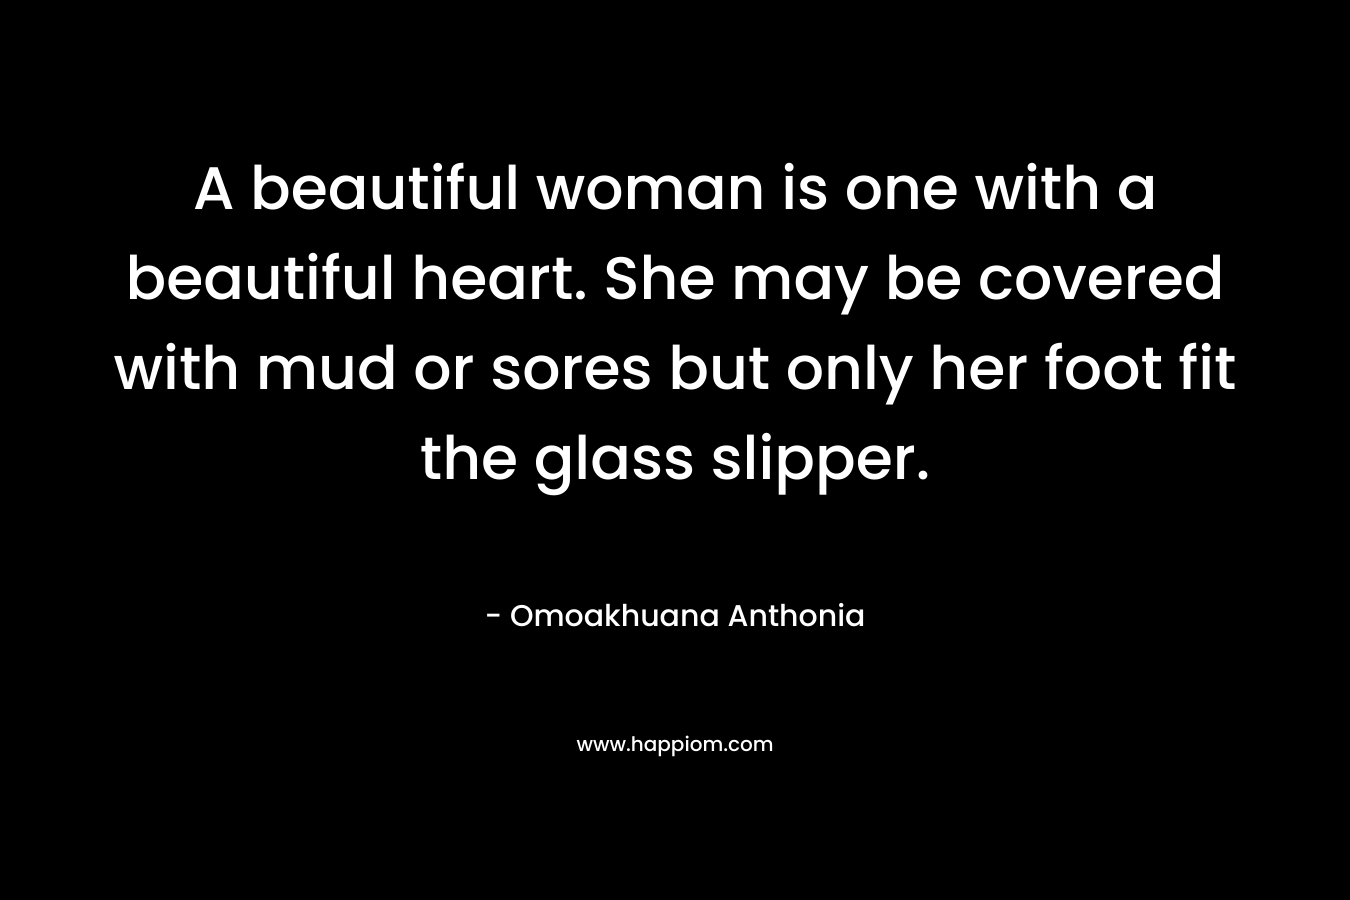 A beautiful woman is one with a beautiful heart. She may be covered with mud or sores but only her foot fit the glass slipper. – Omoakhuana Anthonia